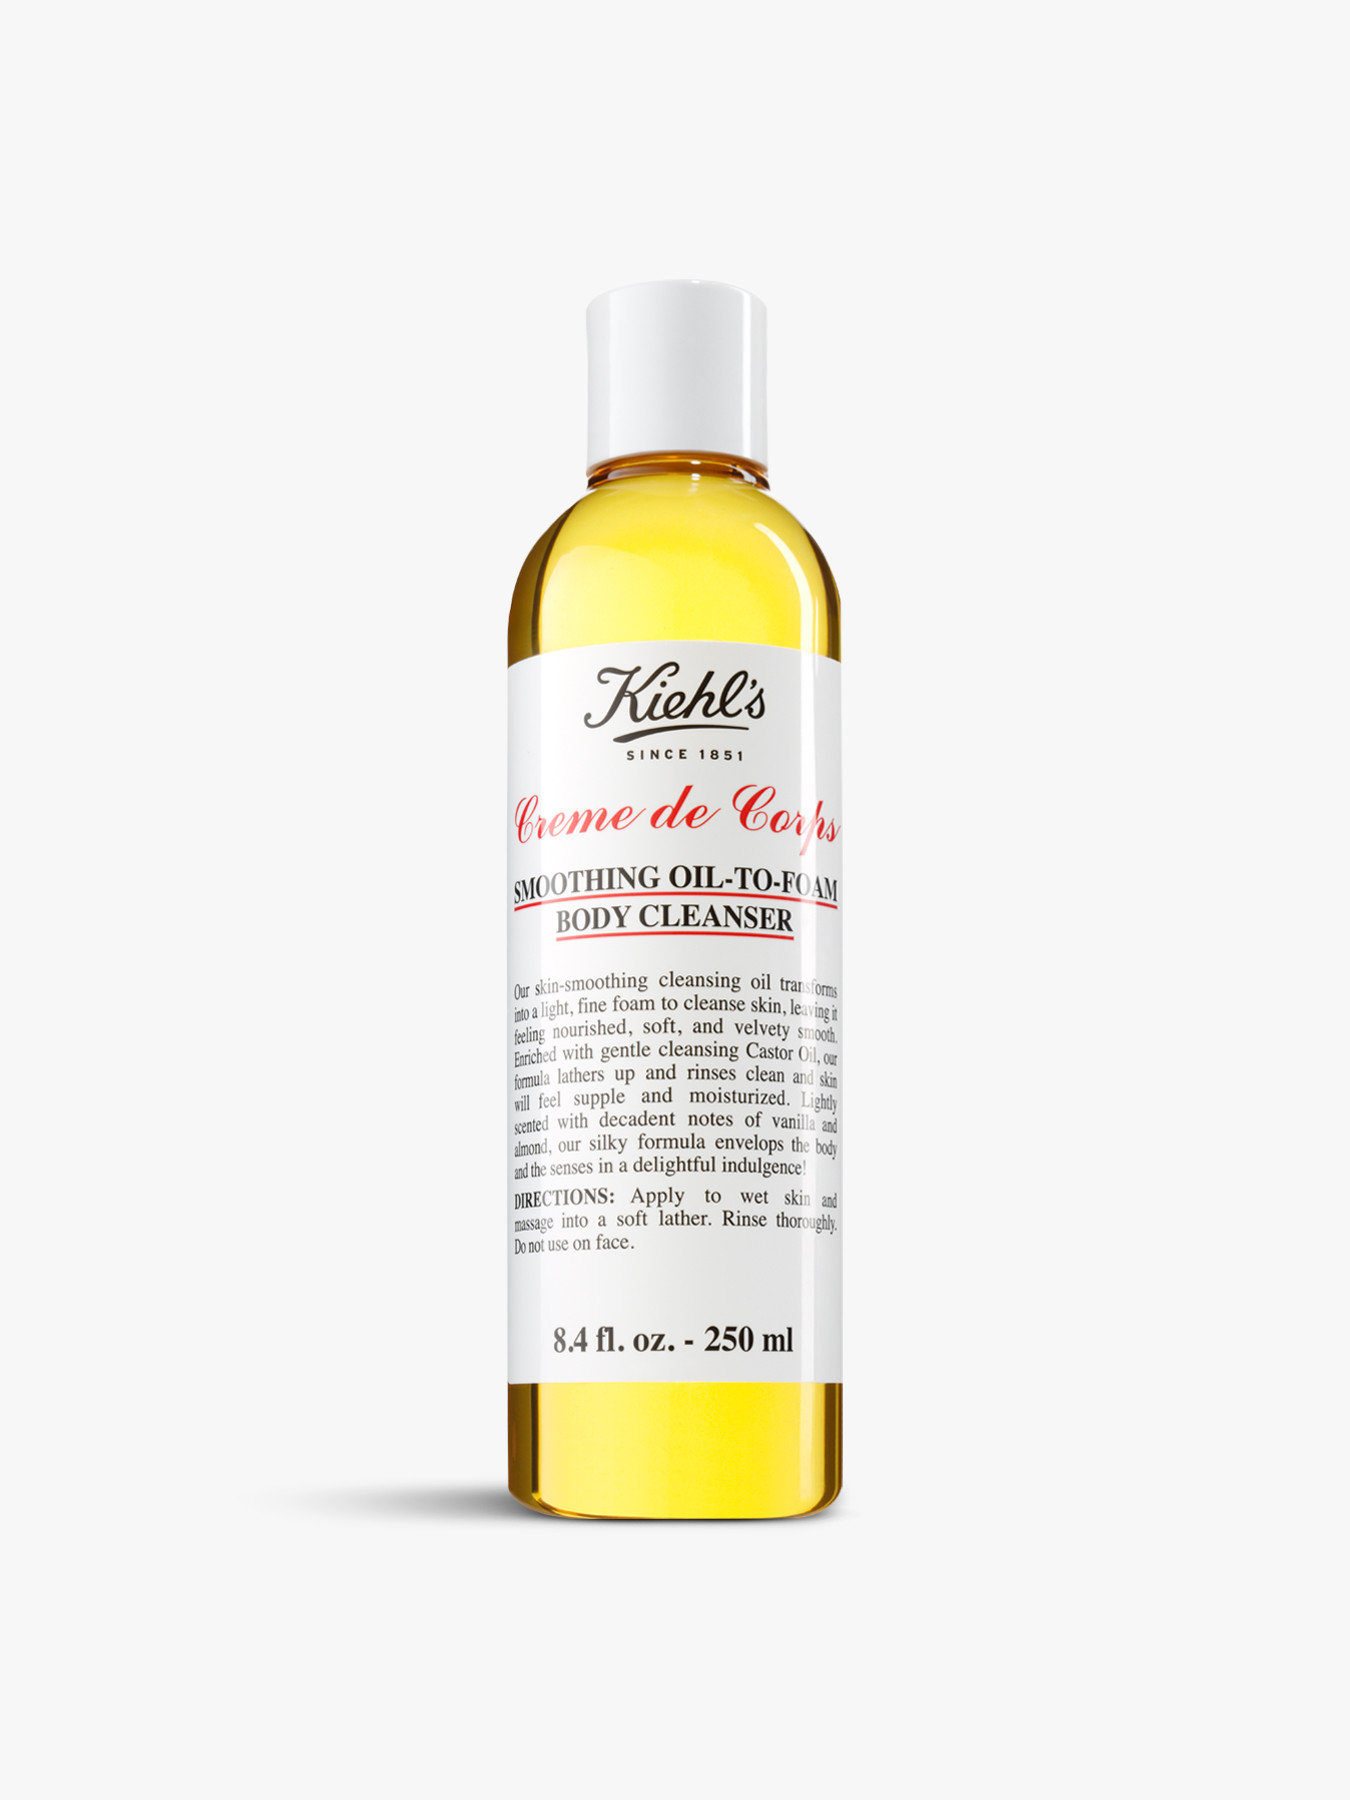 Kiehl's Since 1851 Creme De Corps Smoothing Oil-to-foam Body Cleanser